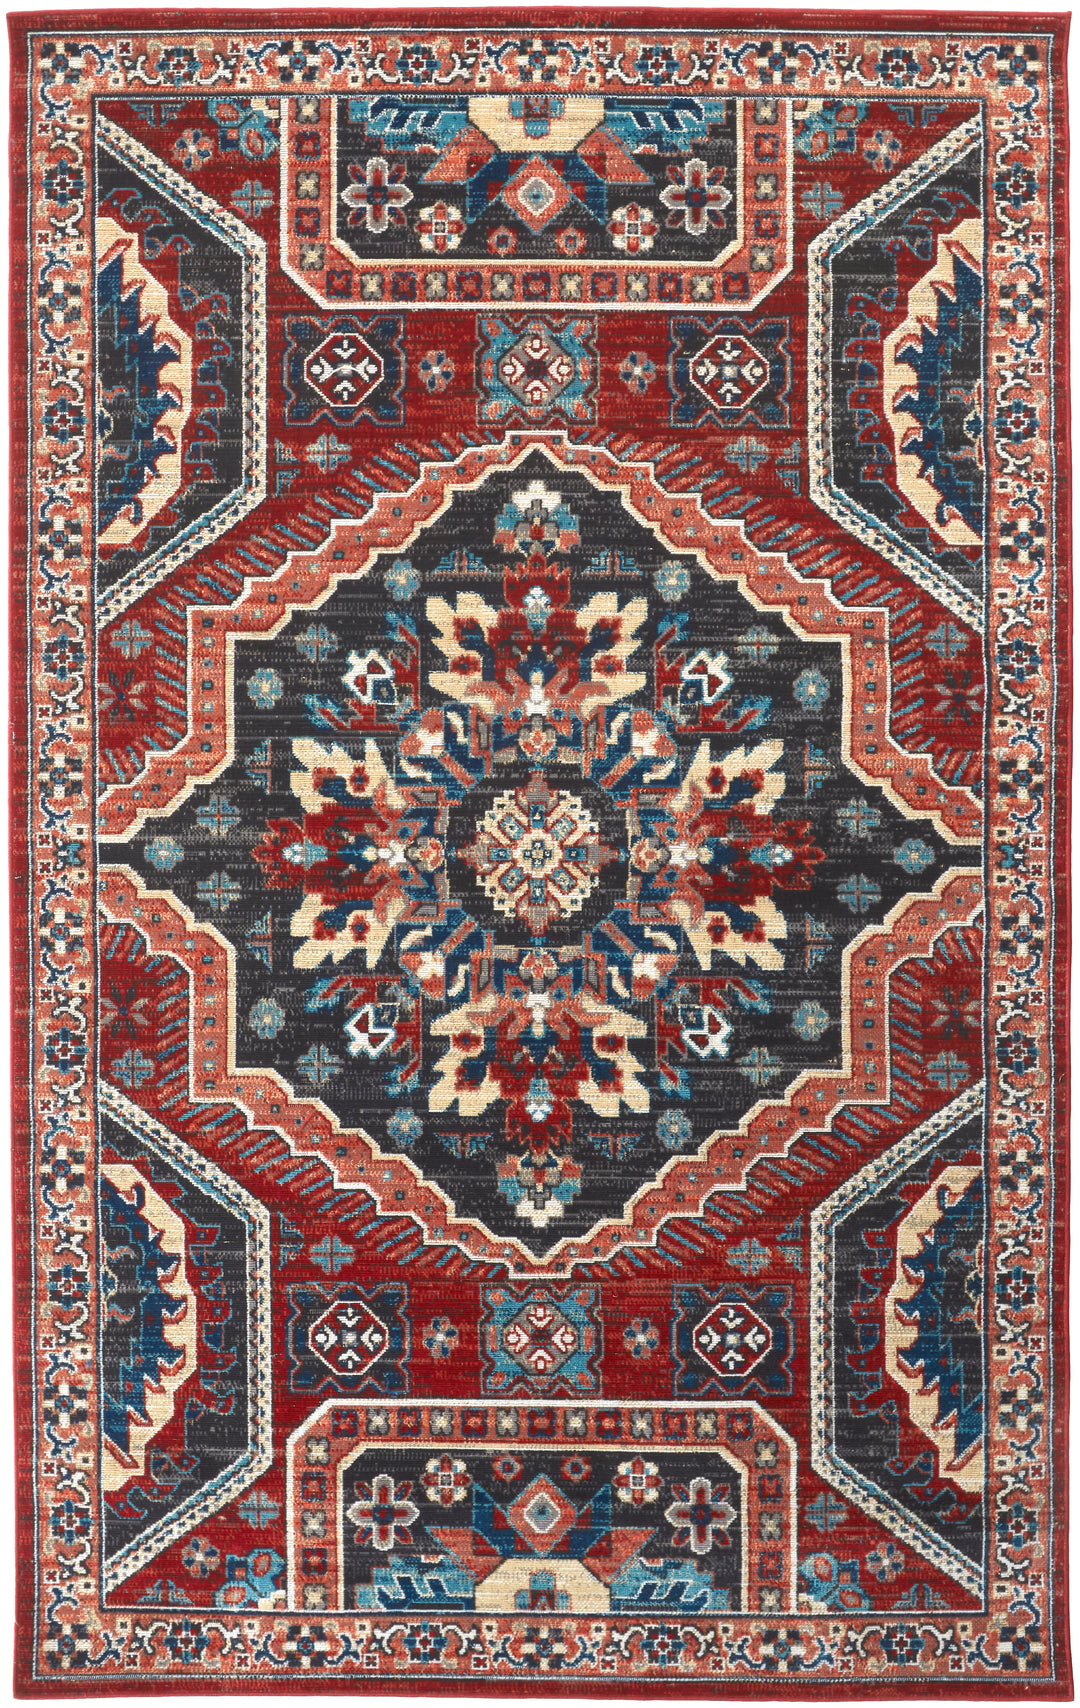 Nolan Transitional Medallion in Red/Gray/Tan Area Rug - Available in 5 Sizes